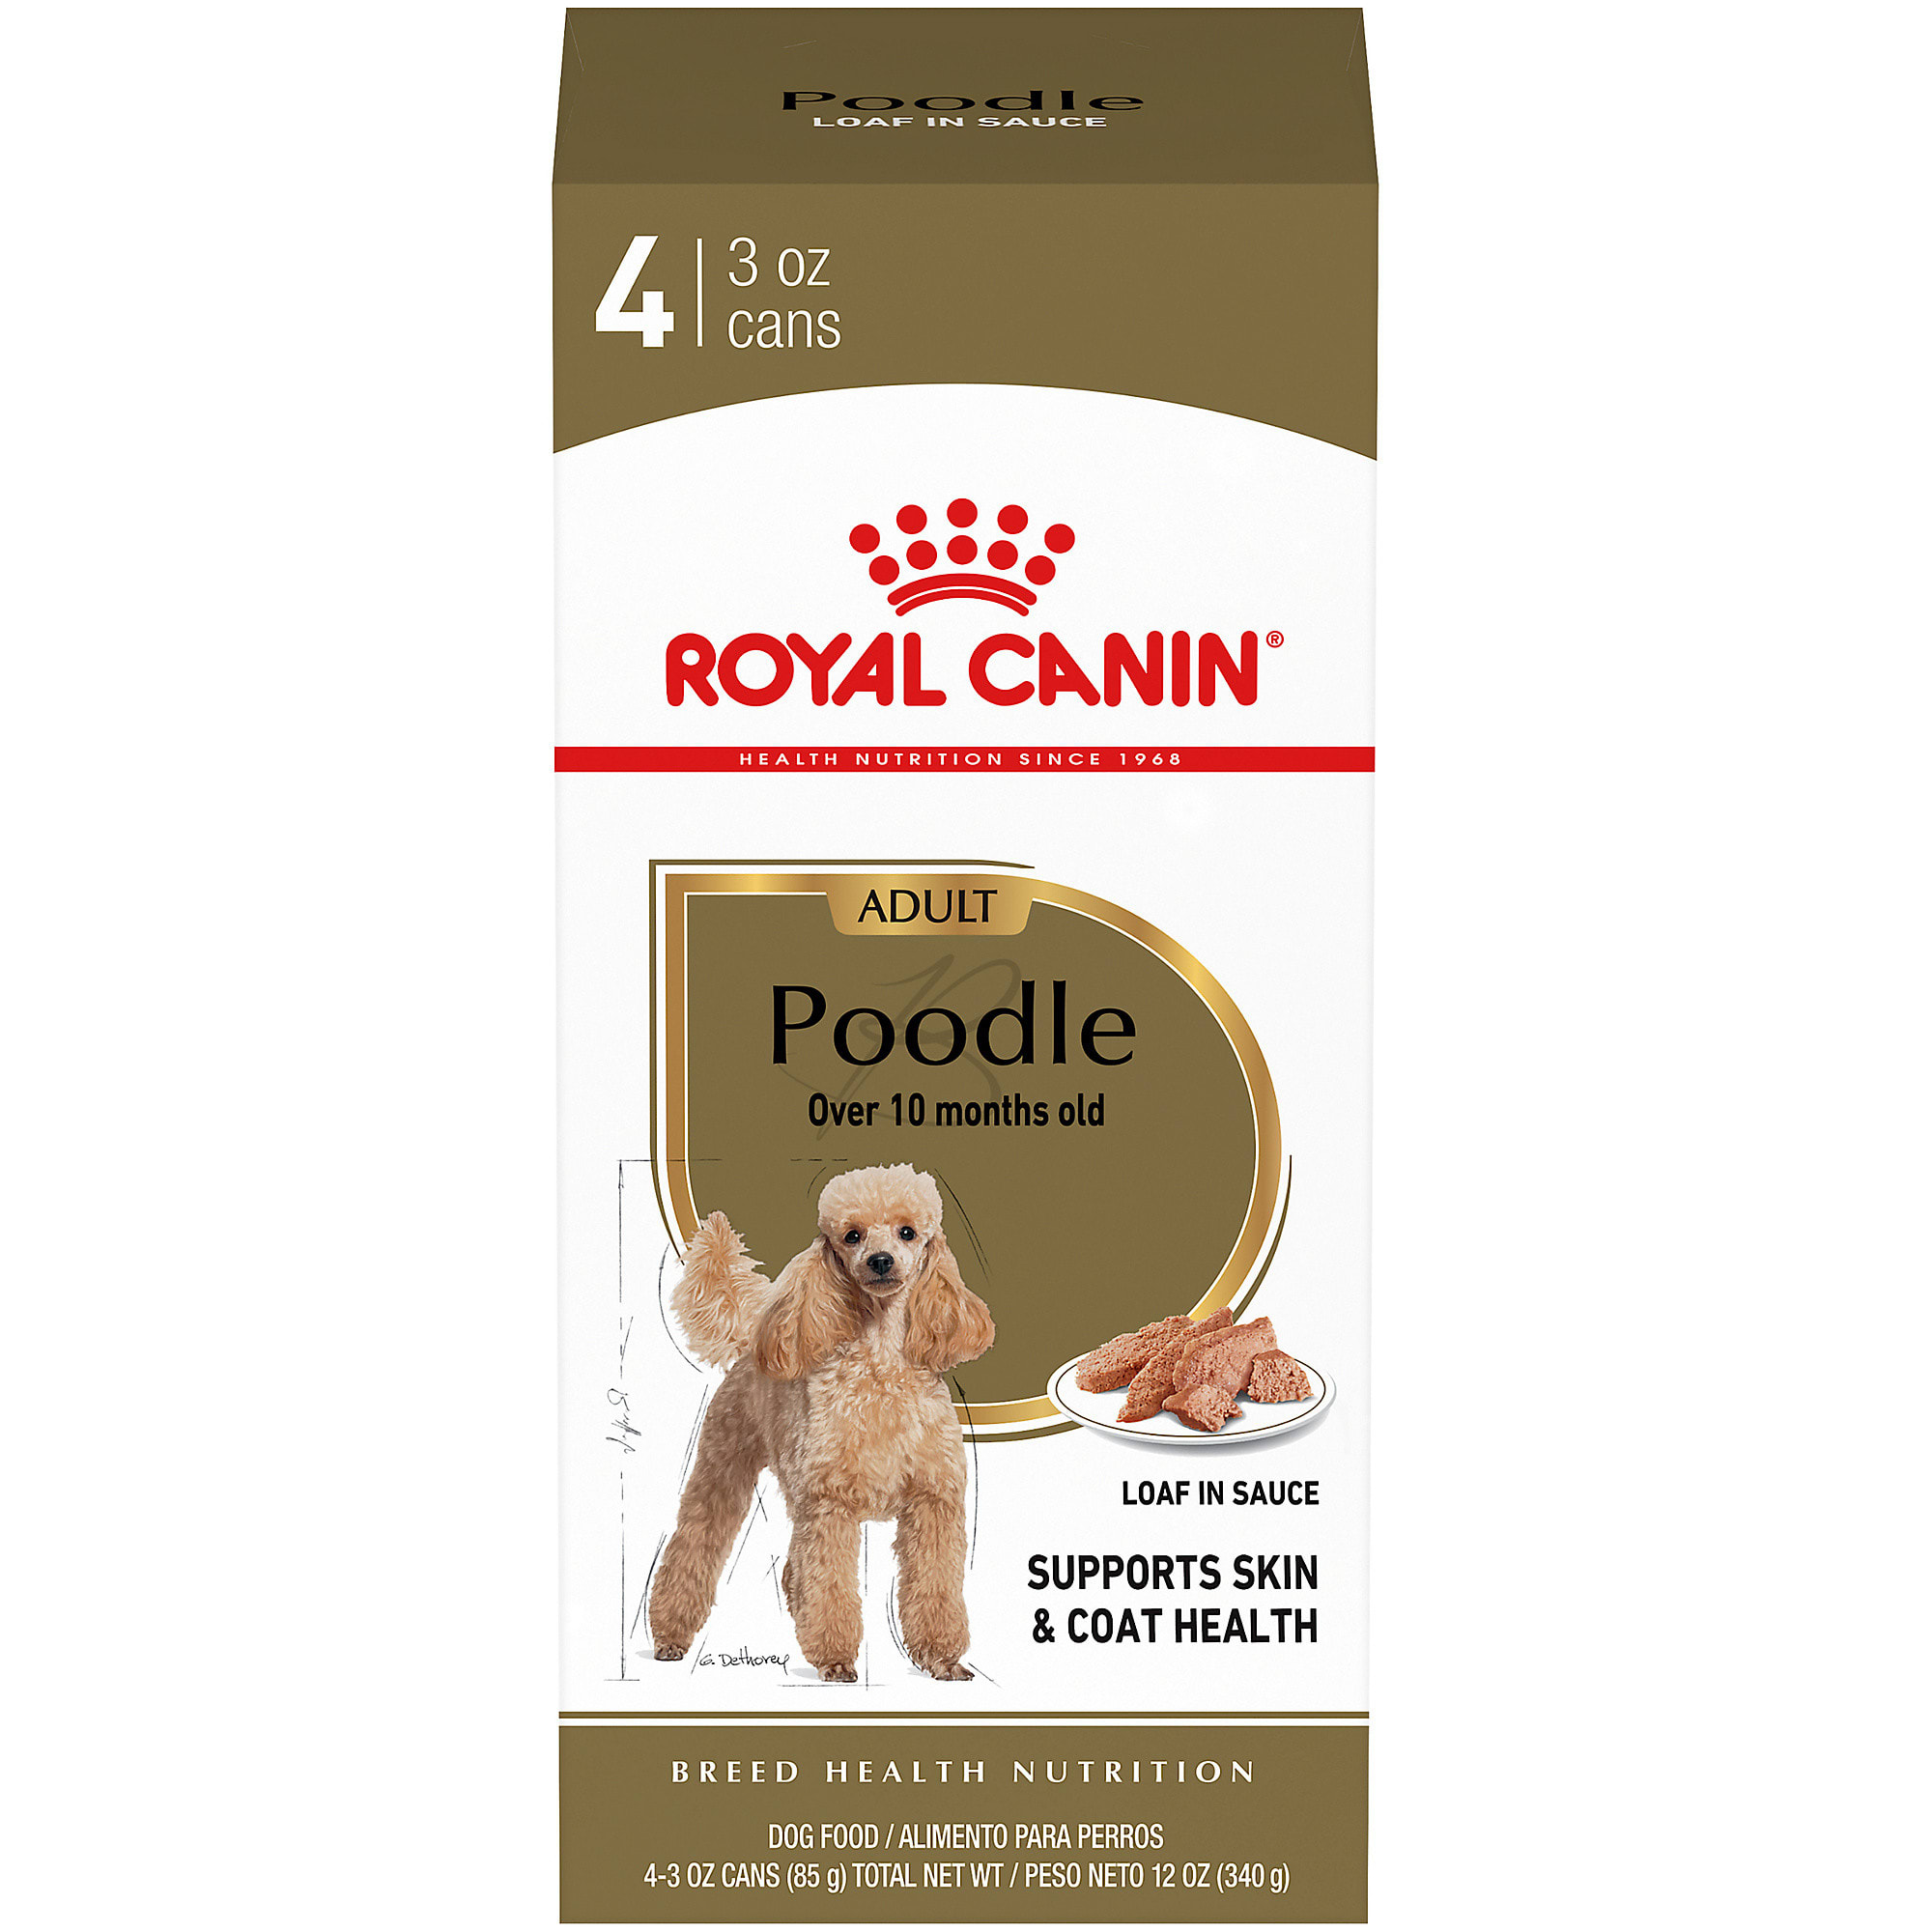 Dog Food For Poodle Petco